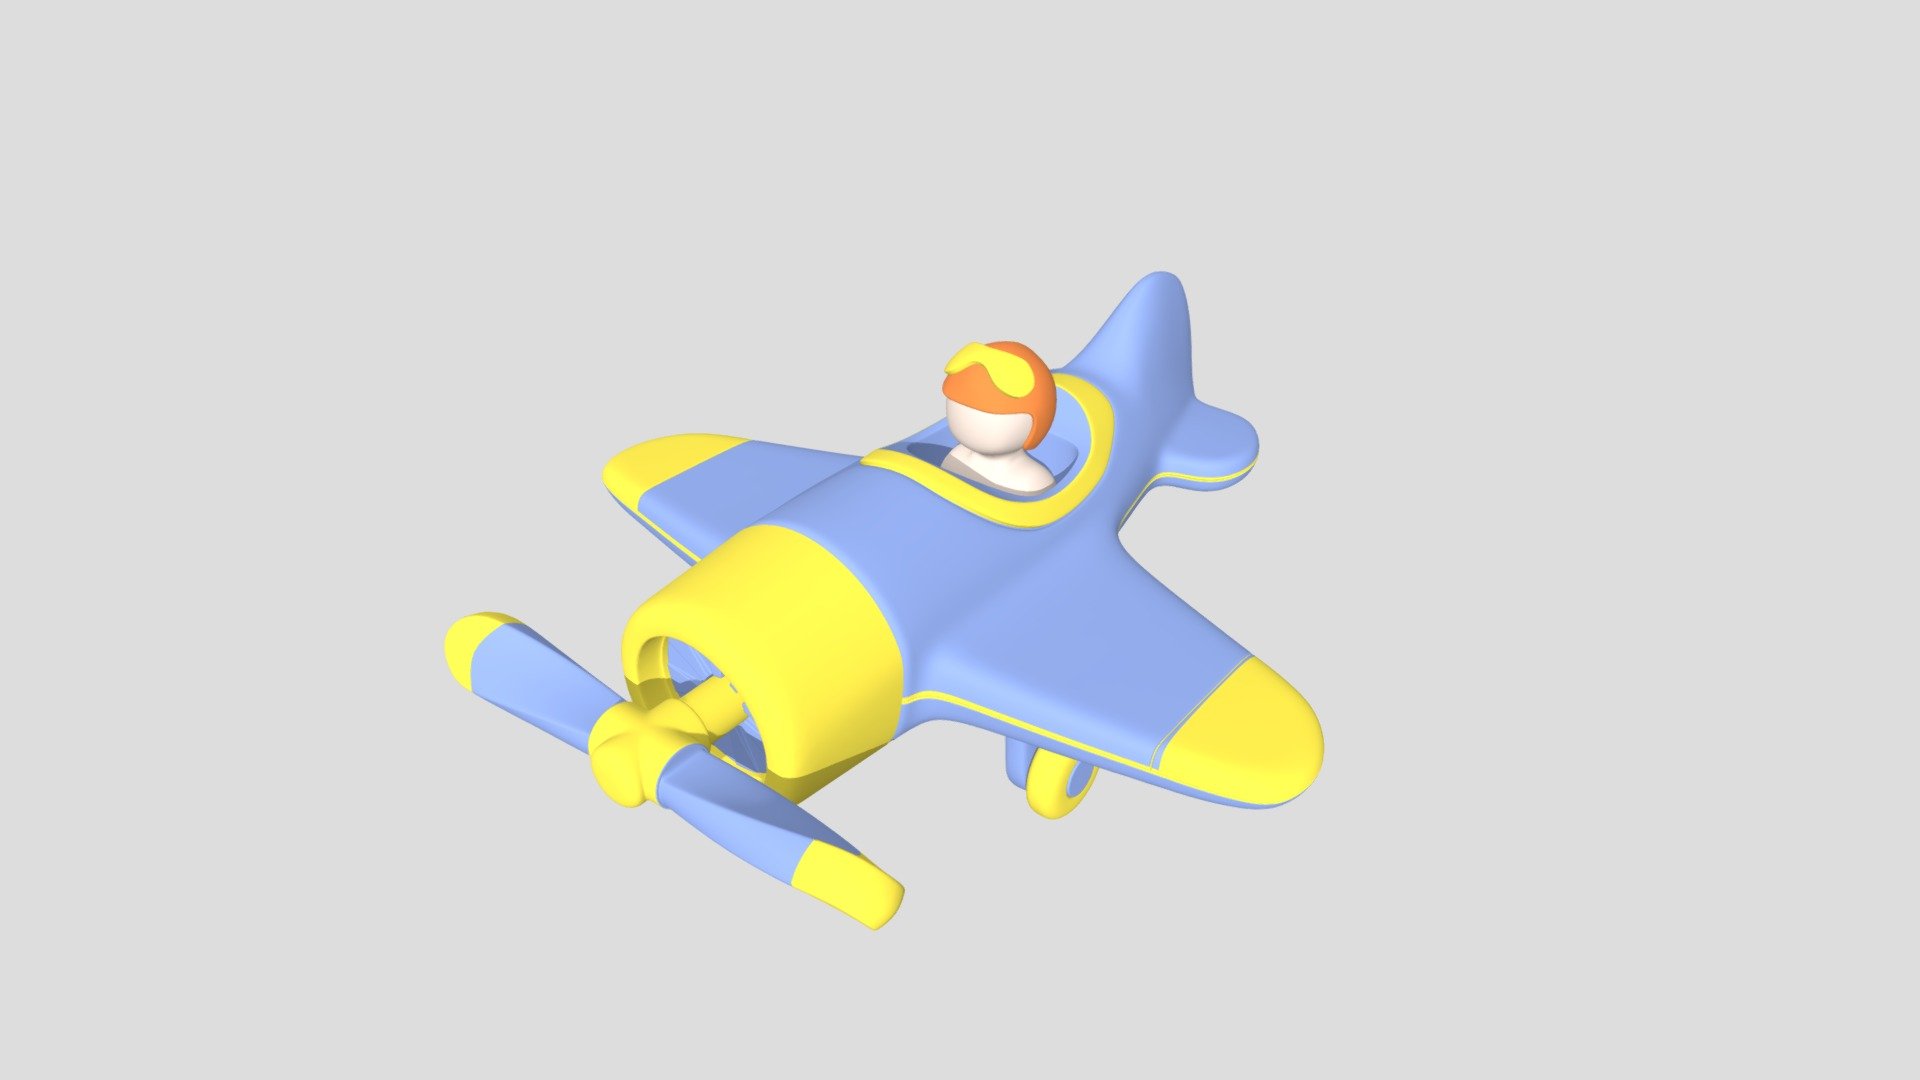 This is a great Ukrainian Cartoon Plane with Pilot 3D model for you projects. Clean mesh and ready for animation.

This scene includes the following:





plane 




pilot



Created in Cinema4D R25. No third party plugins needed. Standard Render with lighting tools and standard materials. 

Formats included:

.c4d .obj .fbx .3ds 

Poly Count: 4968, Points Count: 5067, Object Count: 13

I hope you will like it. Also, make sure to check my other models. Don’t forget to leave the feedback and rate the models. Thank you!

plane, cartoon plane, air, aircraft, low poly, 3d model, airplane, jet, pilot, propeller, fly, avia, low poly plane, 3d, military, polygonal, yellow, blue, ukraine, helmet, sky, aviation, flying, subdivided, cinema 4d, c4d, model, modeling, cartoon, game - Cartoon Plane with Pilot - 3D model by ruslanmikaielian 3d model